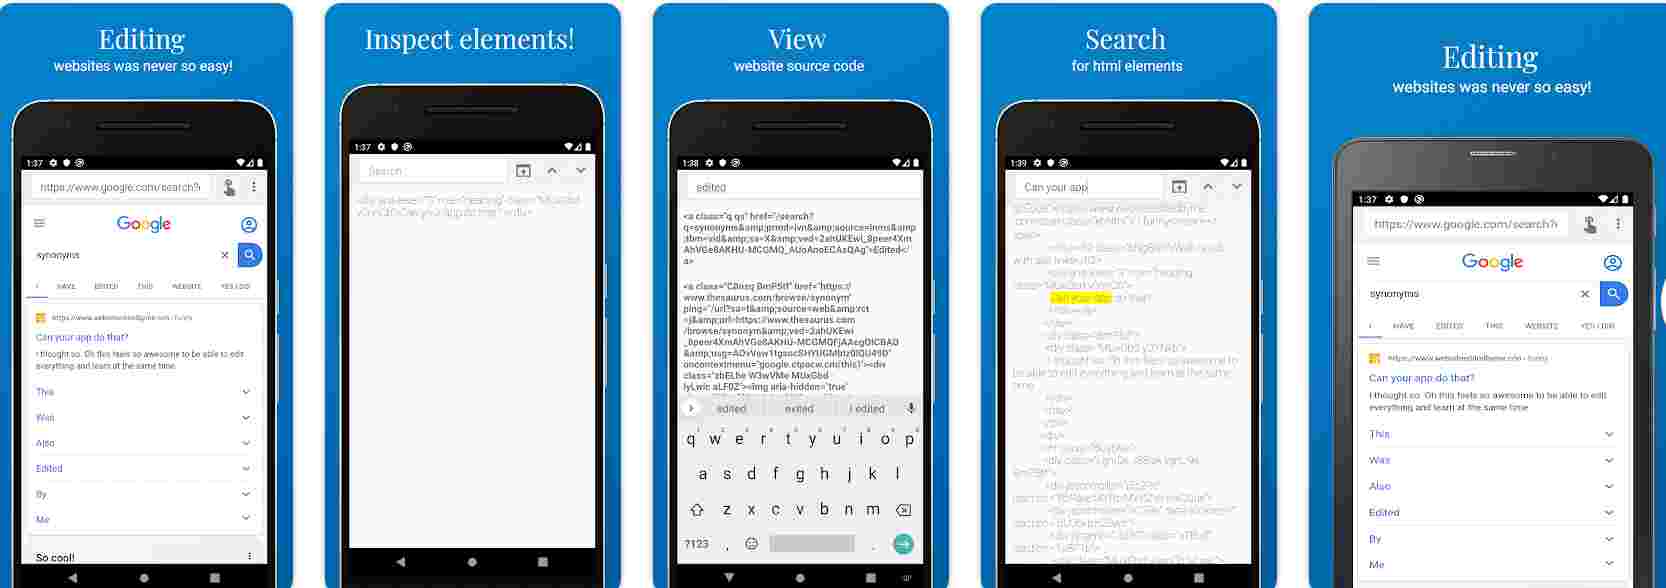 inspect elements on android